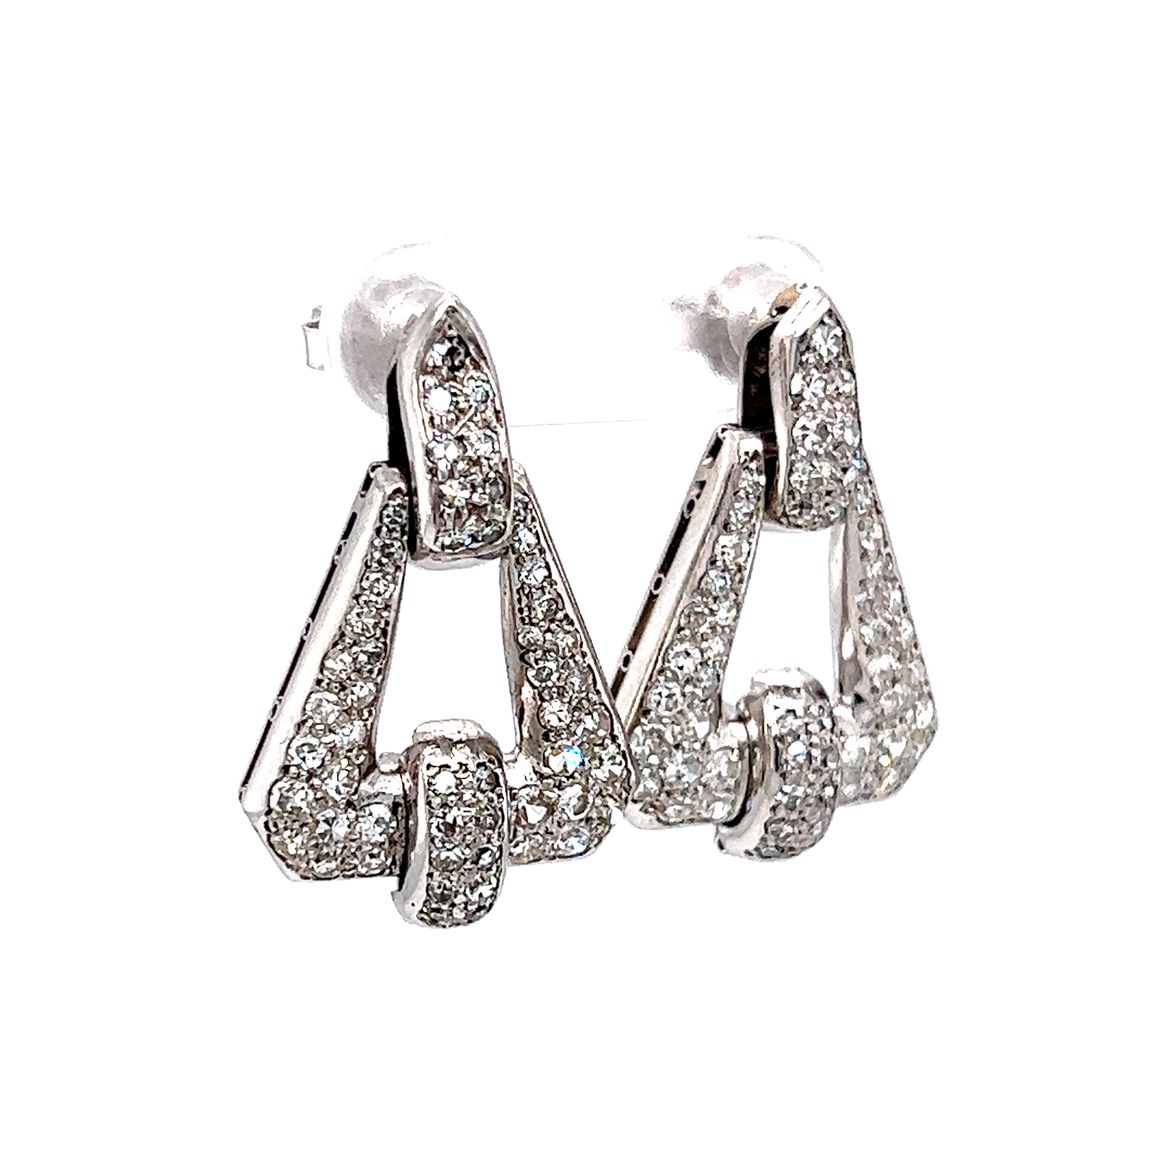 Art Deco Pave Diamond Drop Earrings in PlatinumComposition: Platinum Total Diamond Weight: 1.59ct Total Gram Weight: 11.6 g